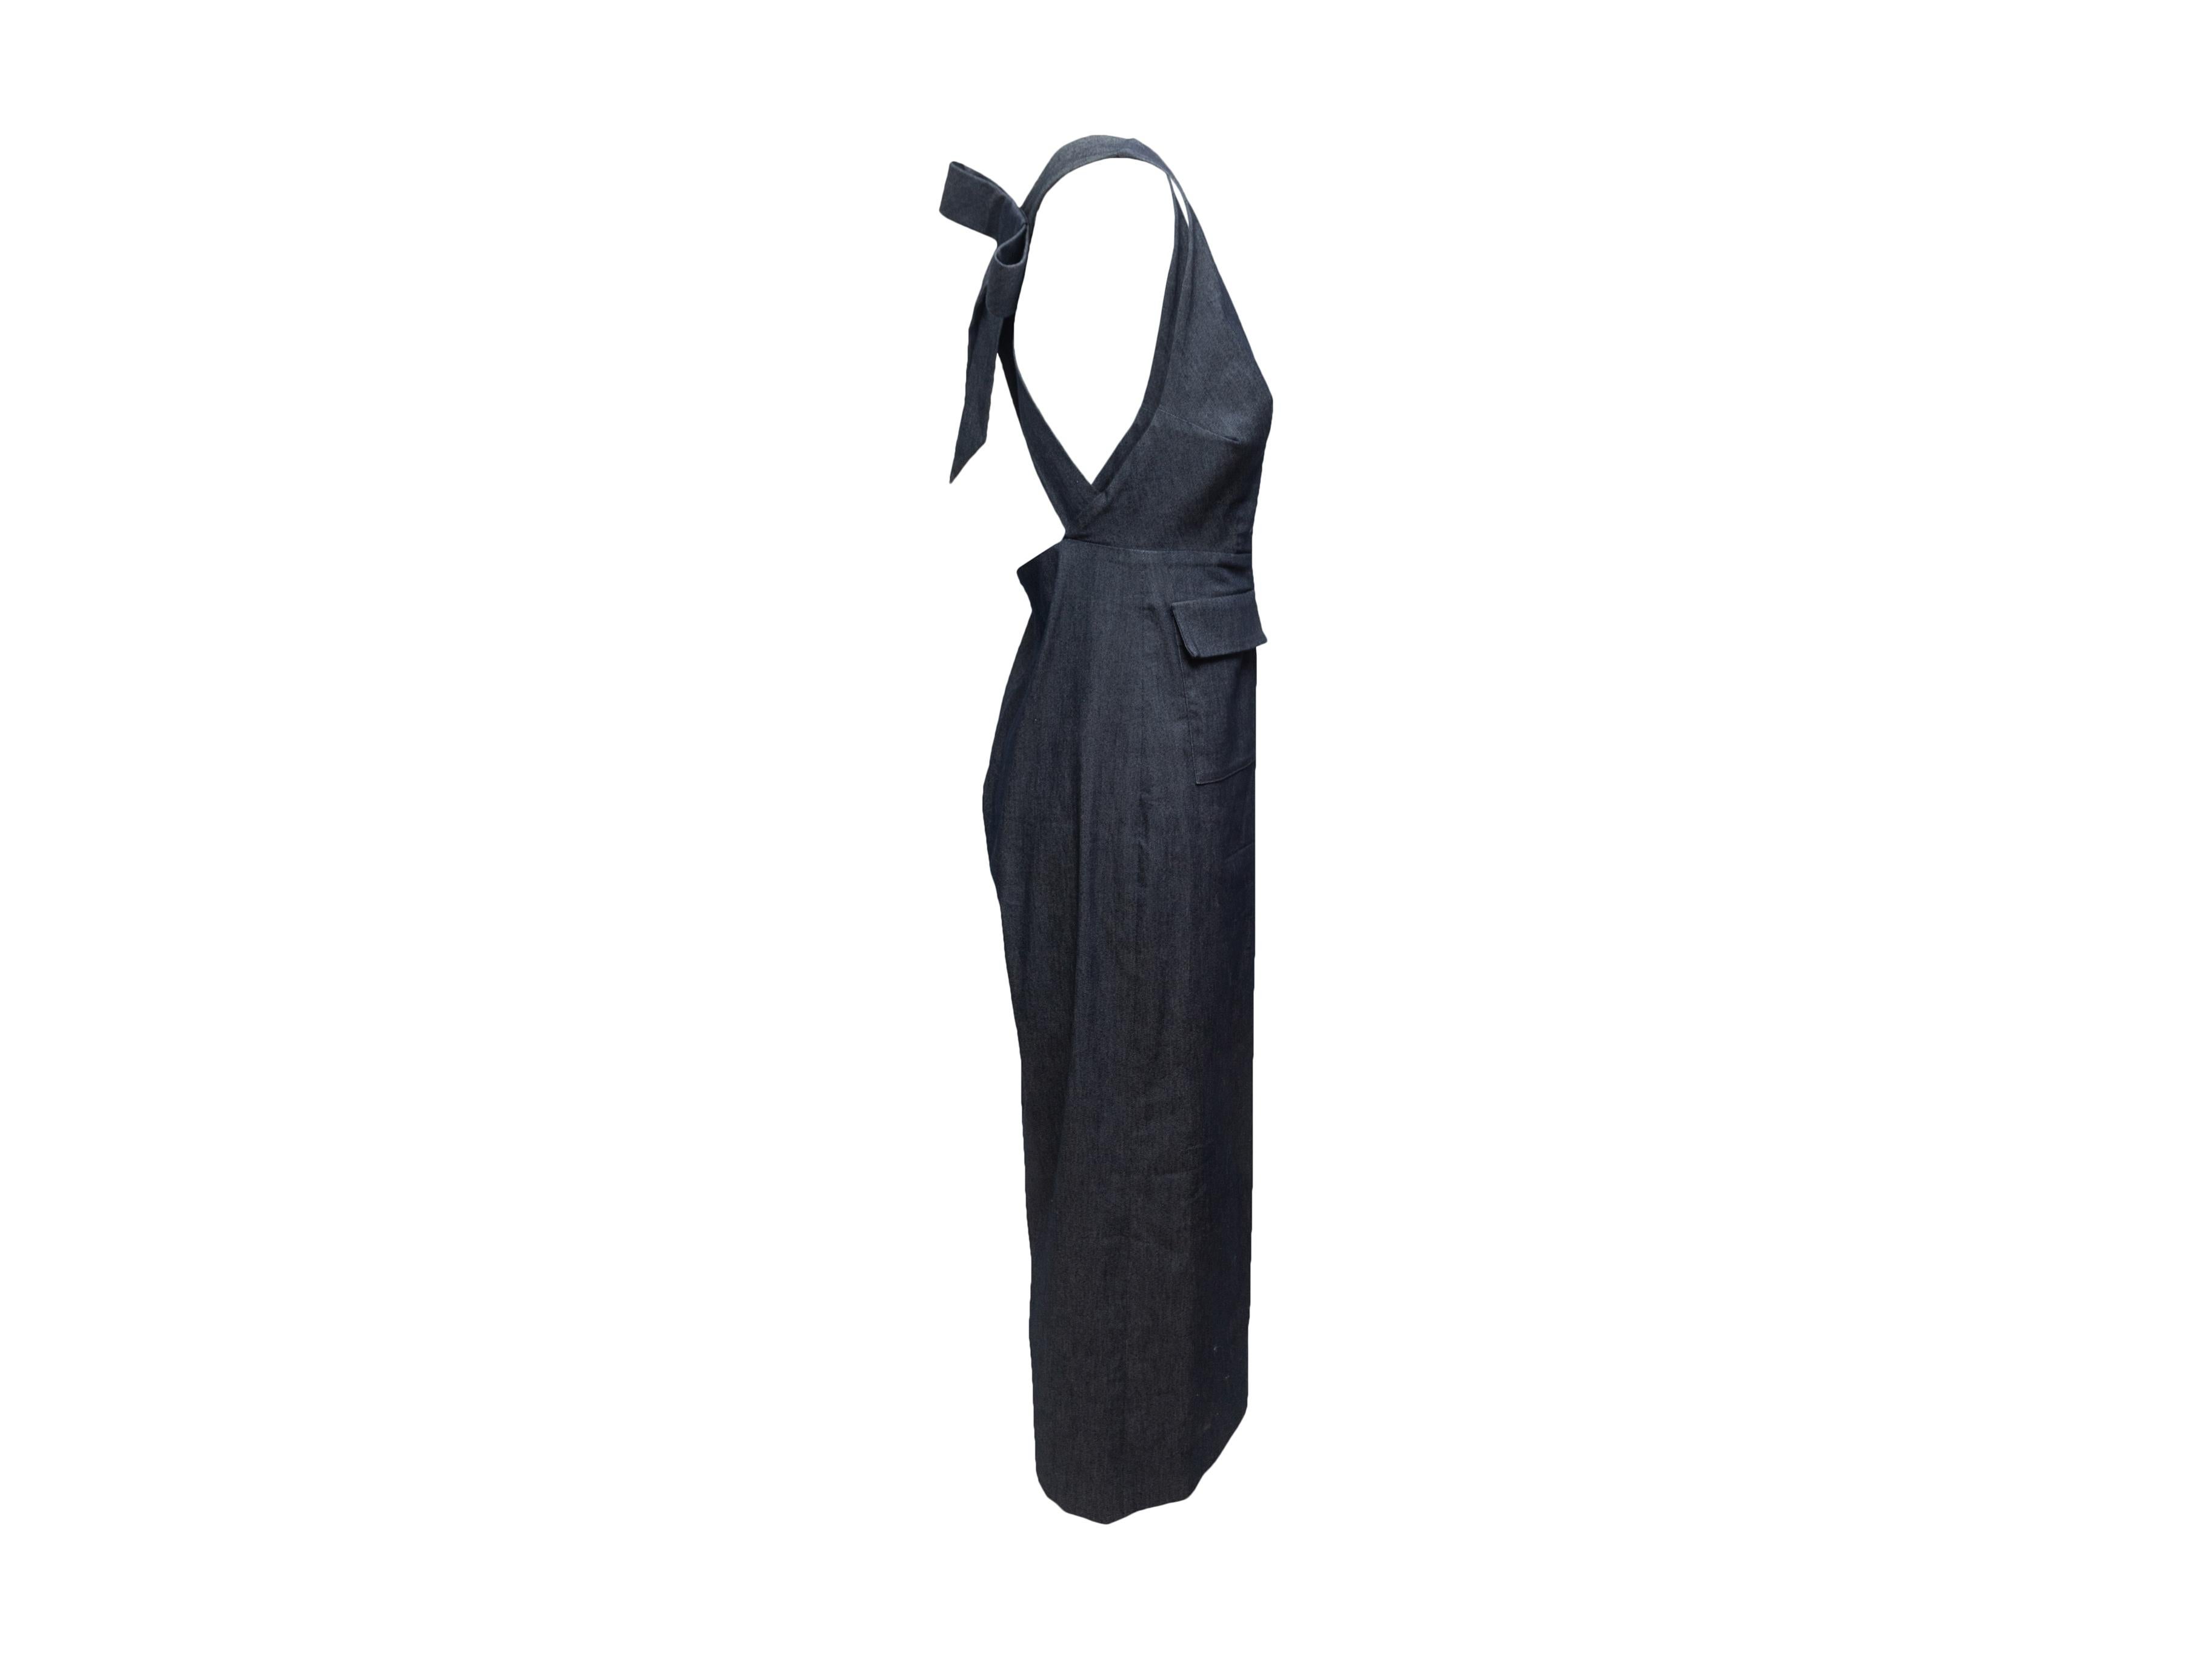 Product details: Dark blue denim Uptown overalls by Cushnie et Ochs. V-neck. Dual flap pockets at hips. Bow accent at back. Zip closure at center back. 17